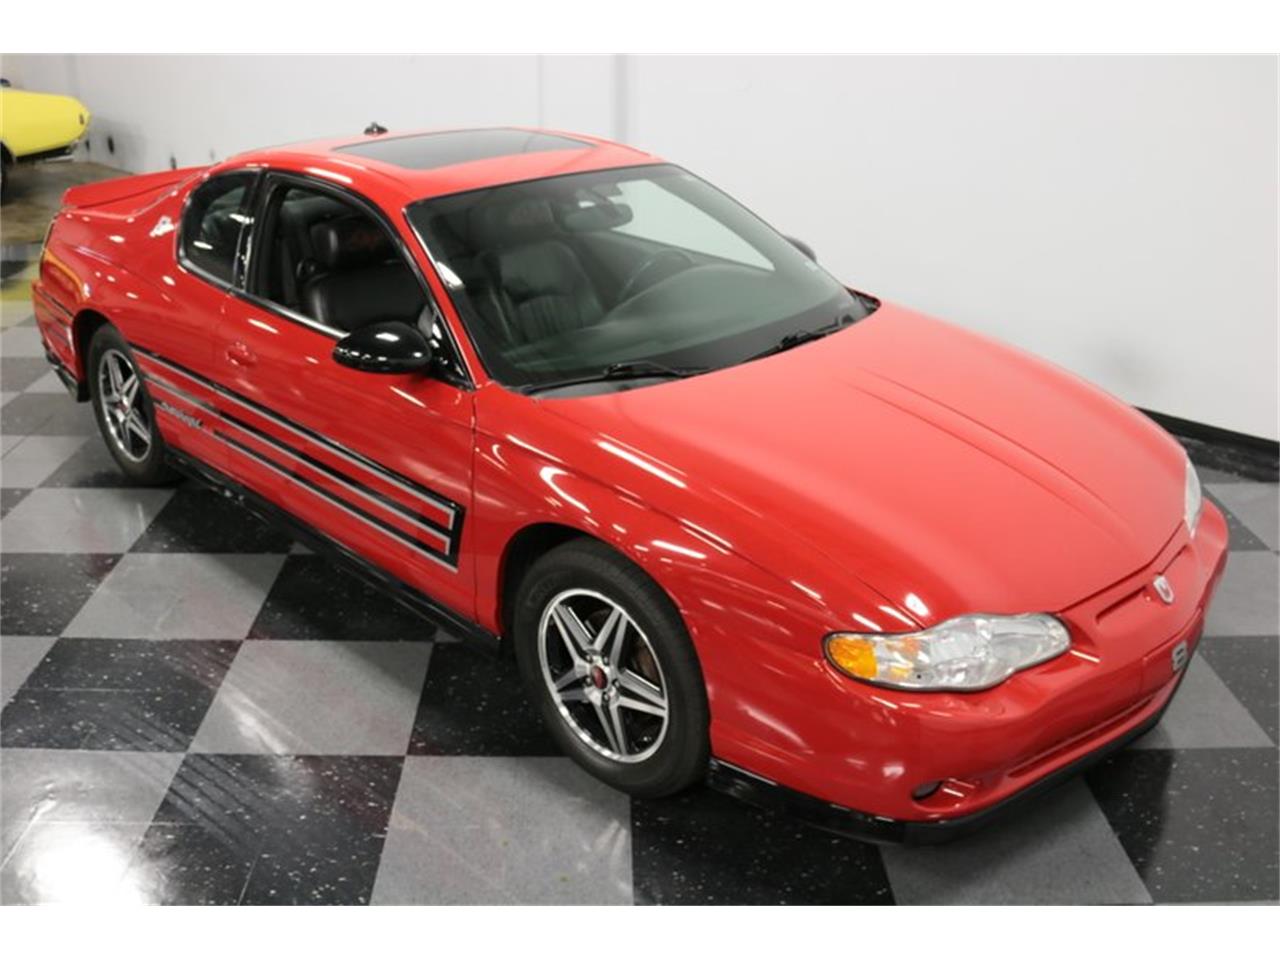 2004 Chevrolet Monte Carlo for sale in Fort Worth, TX – photo 79